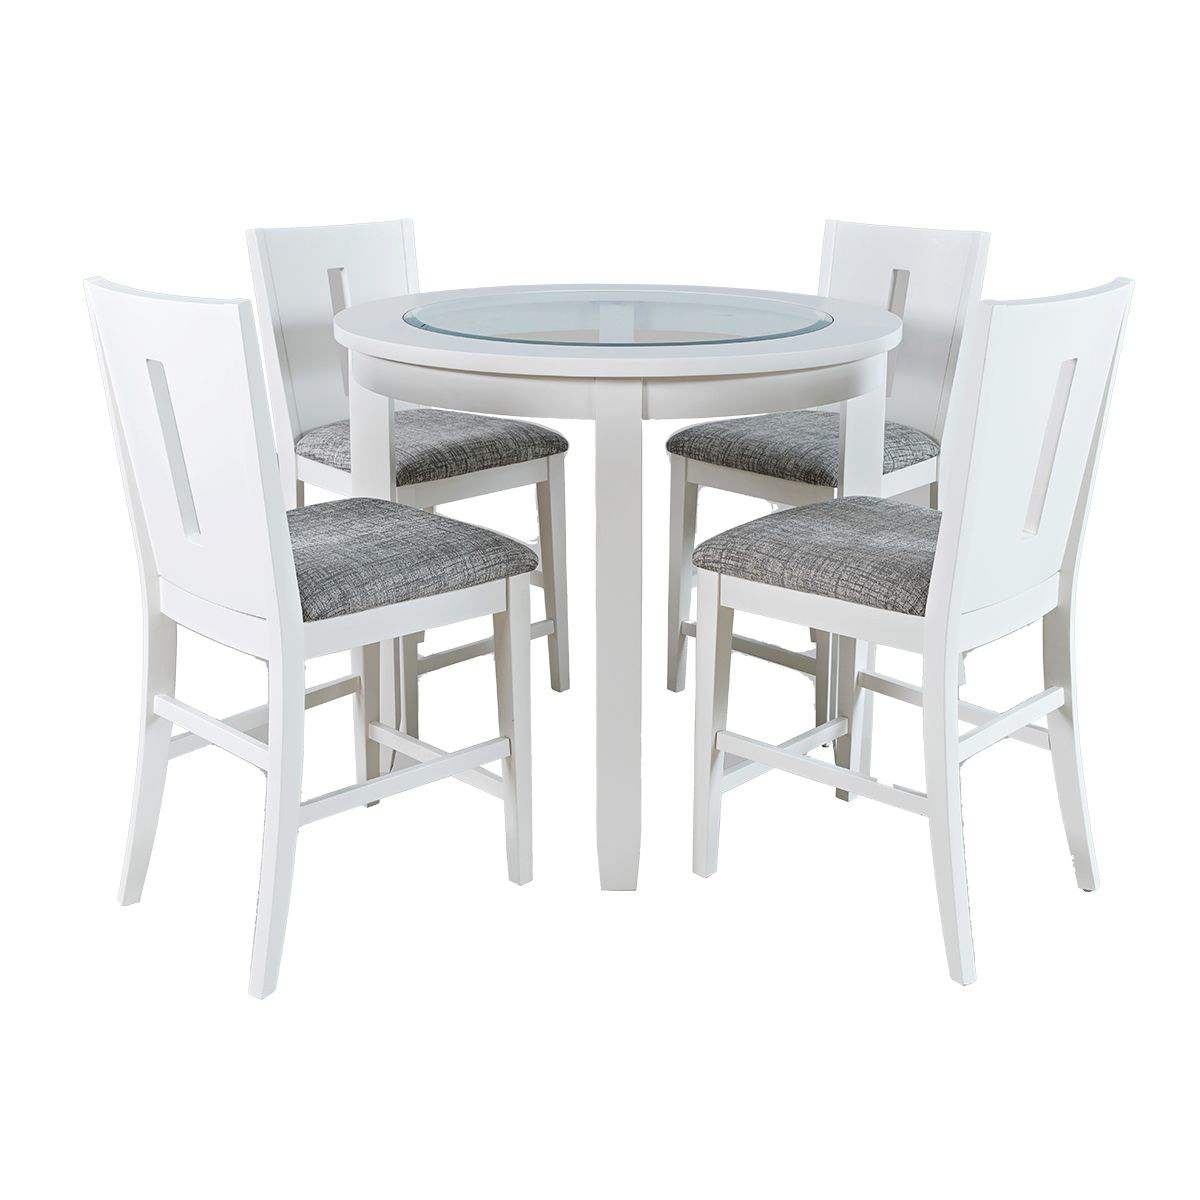 Picture of URBAN ICON WHT RND CNT TABLE